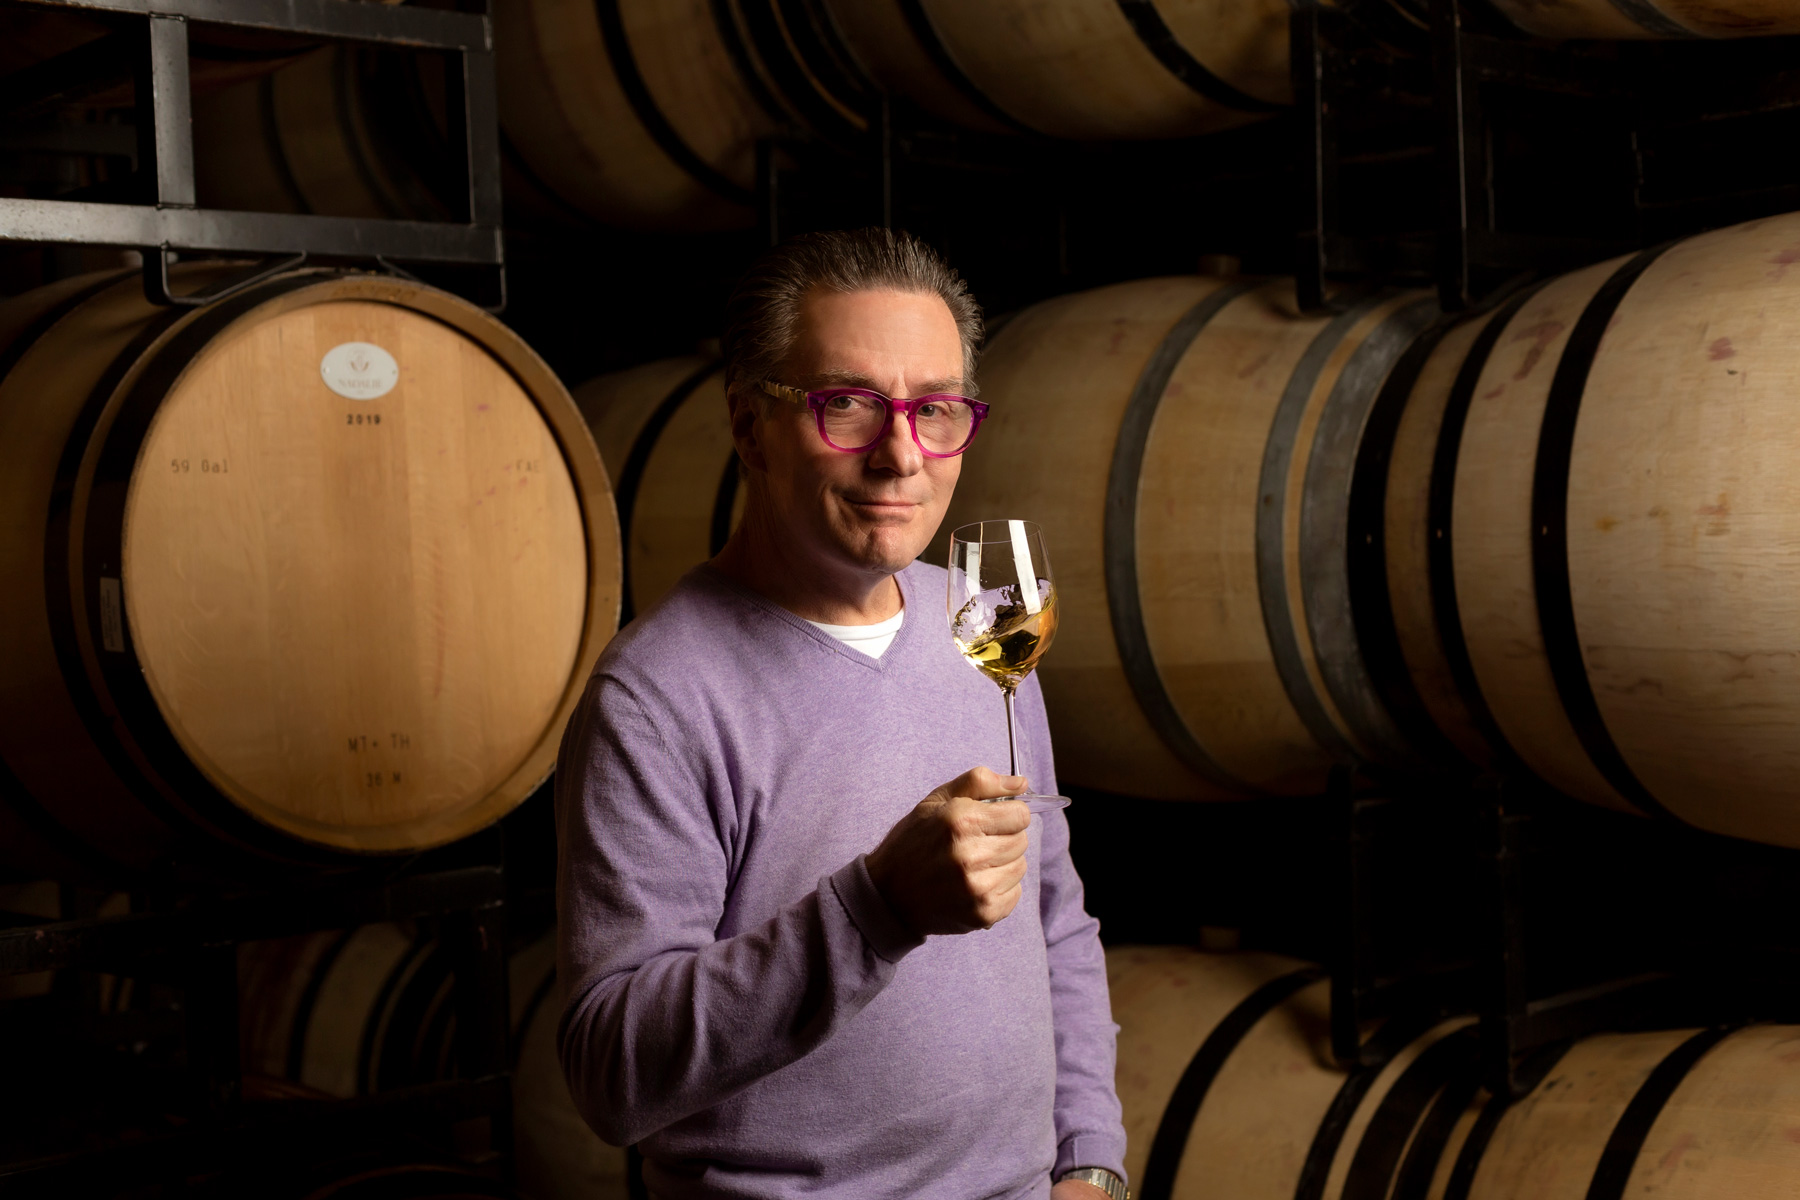 Vance Rose, Jonive Winemaker posing in front of a barrel at the winery.